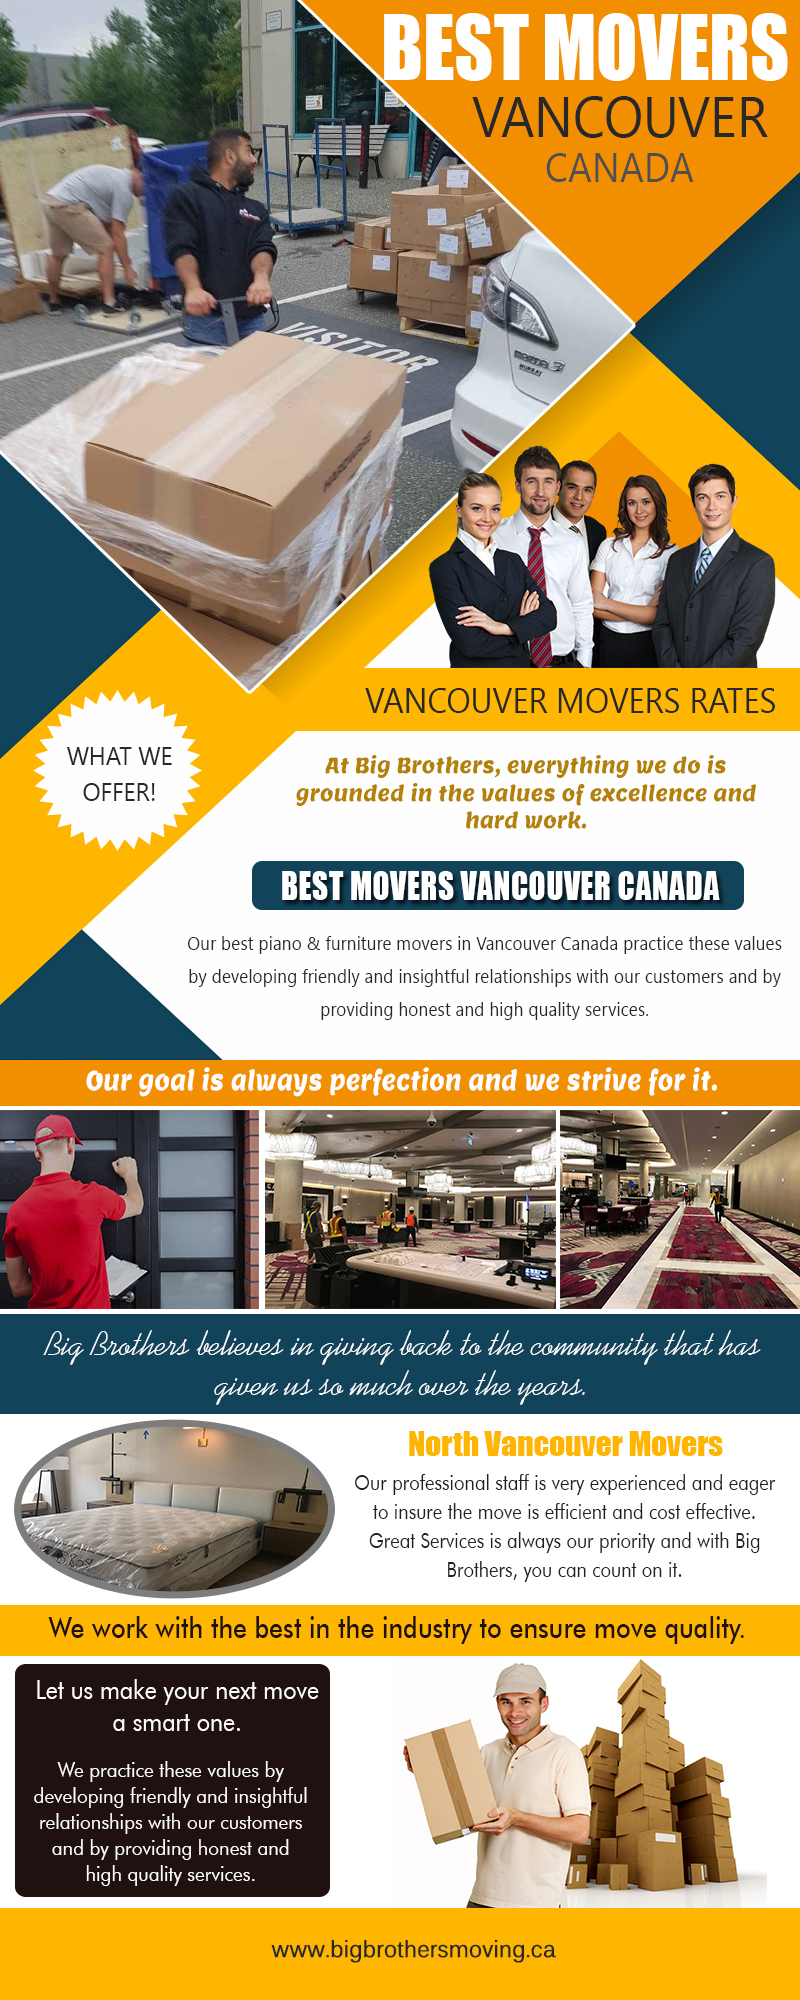 Best-Movers-Vancouver-Canada